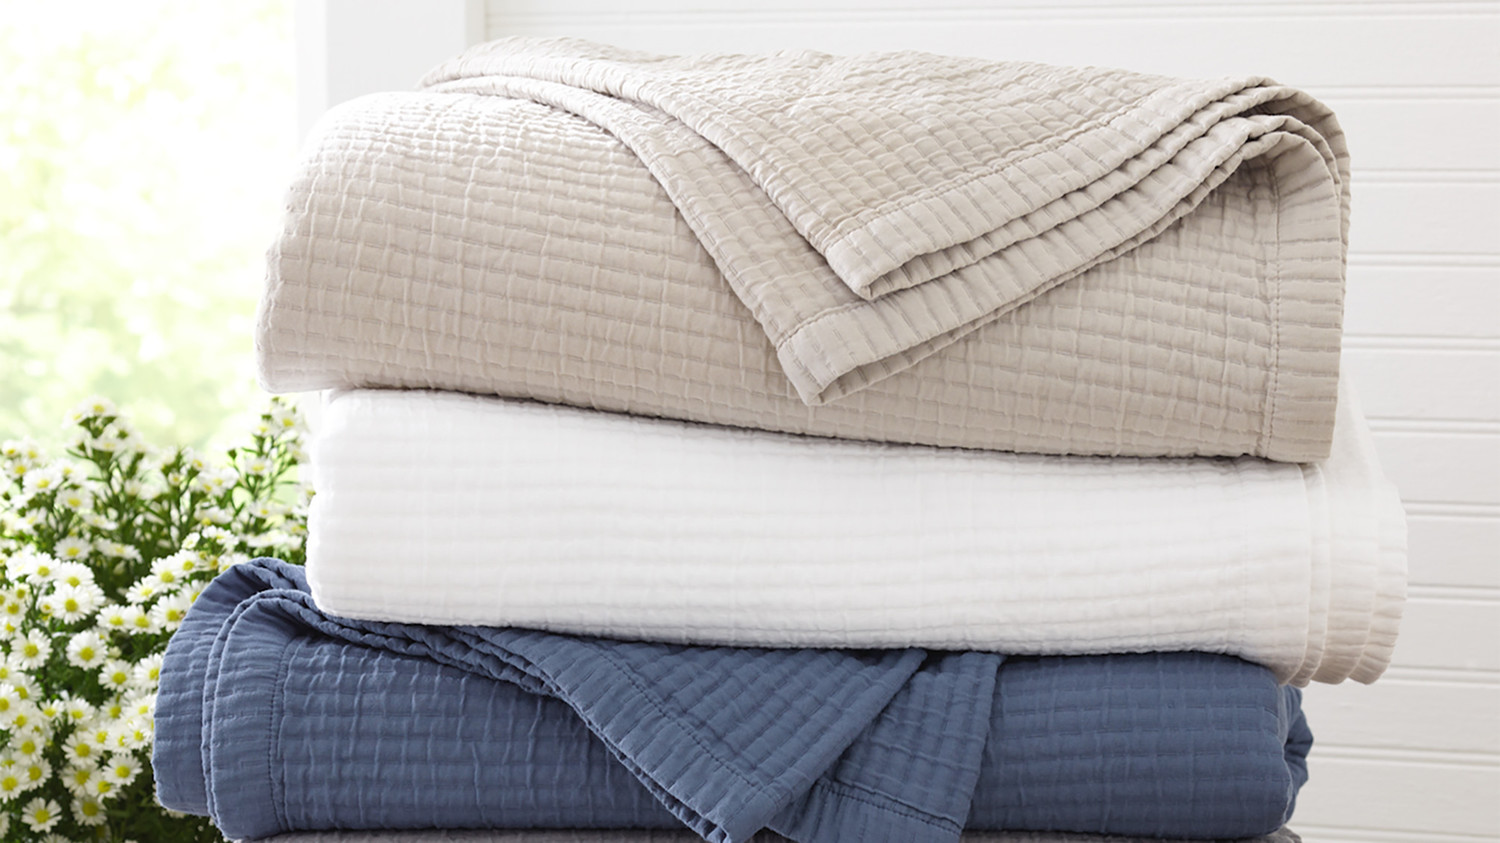 For Every Blanket Purchased, This Home Brand Will Donate Another to a ...